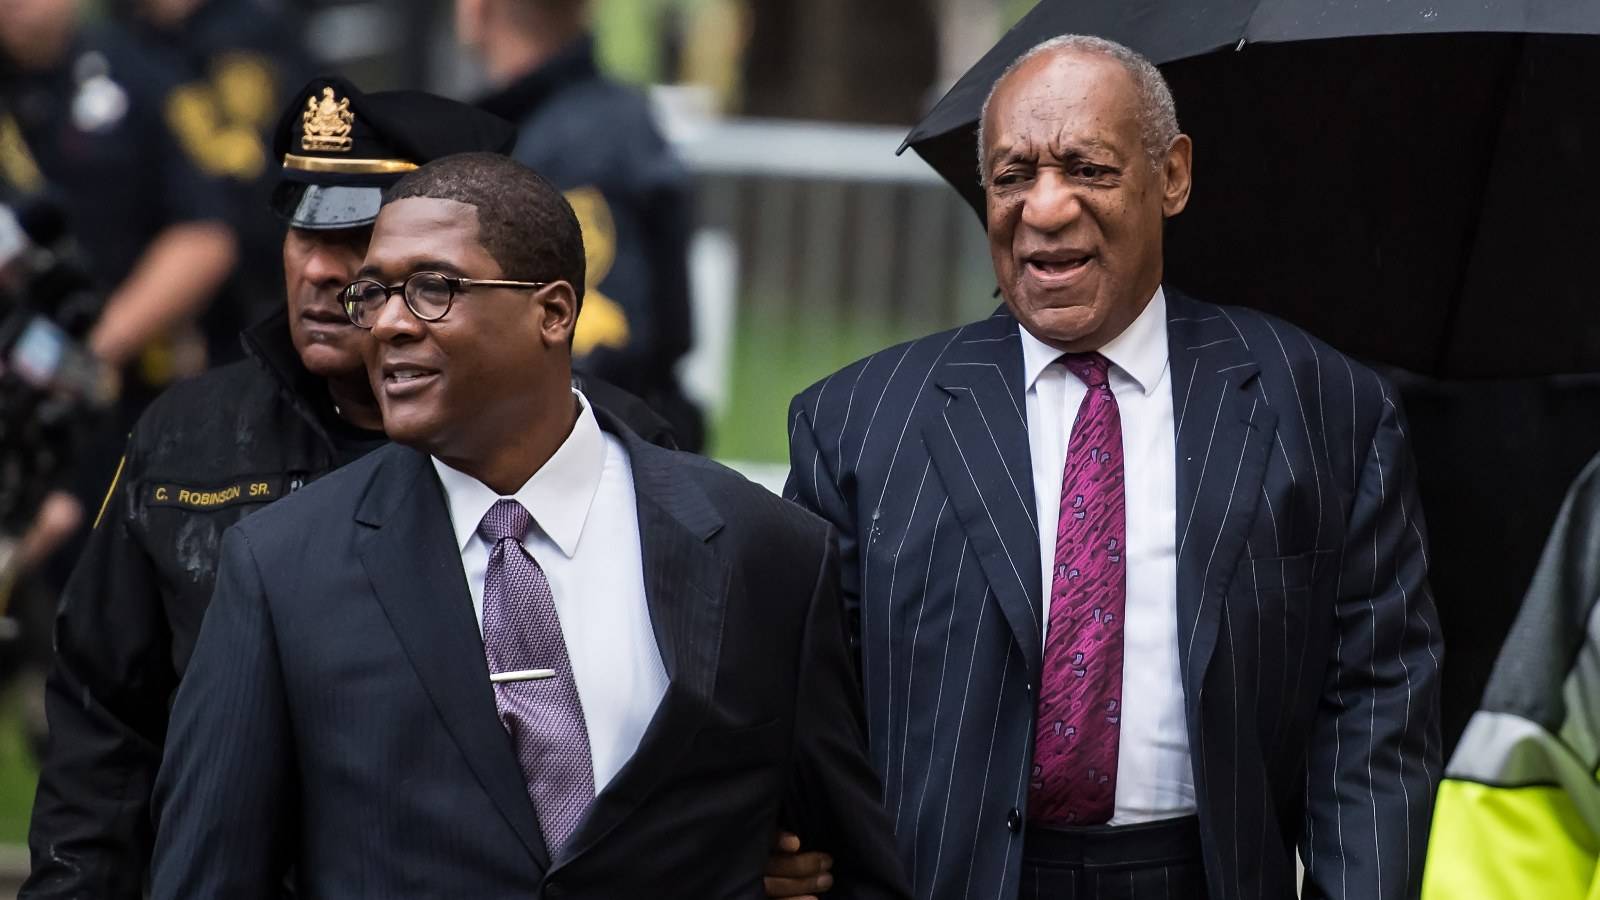 Actor/stand-up comedian Bill Cosby arrives for sentencing for his sexual assault trial at the Montgomery County Courthouse on September 25, 2018 in Norristown, Pennsylvania. 